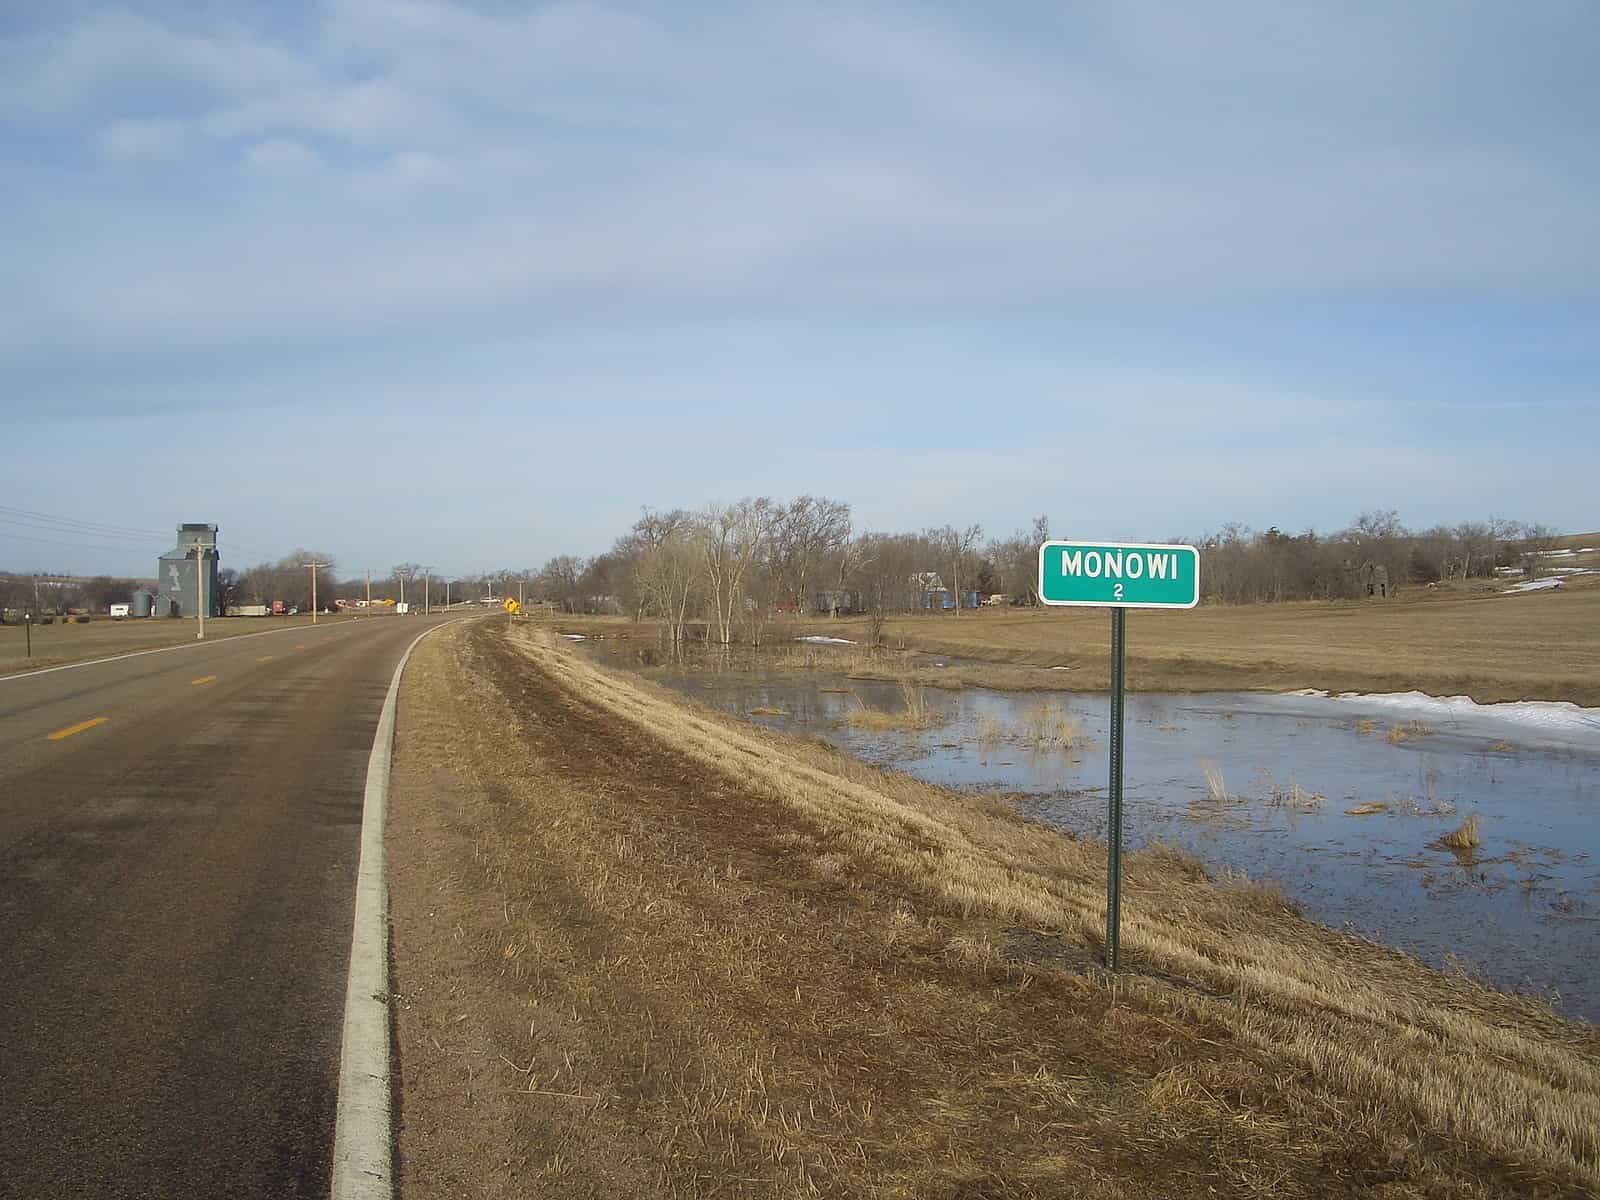 A sign that reads "Monowi" stands between a deserted road and a small pond.